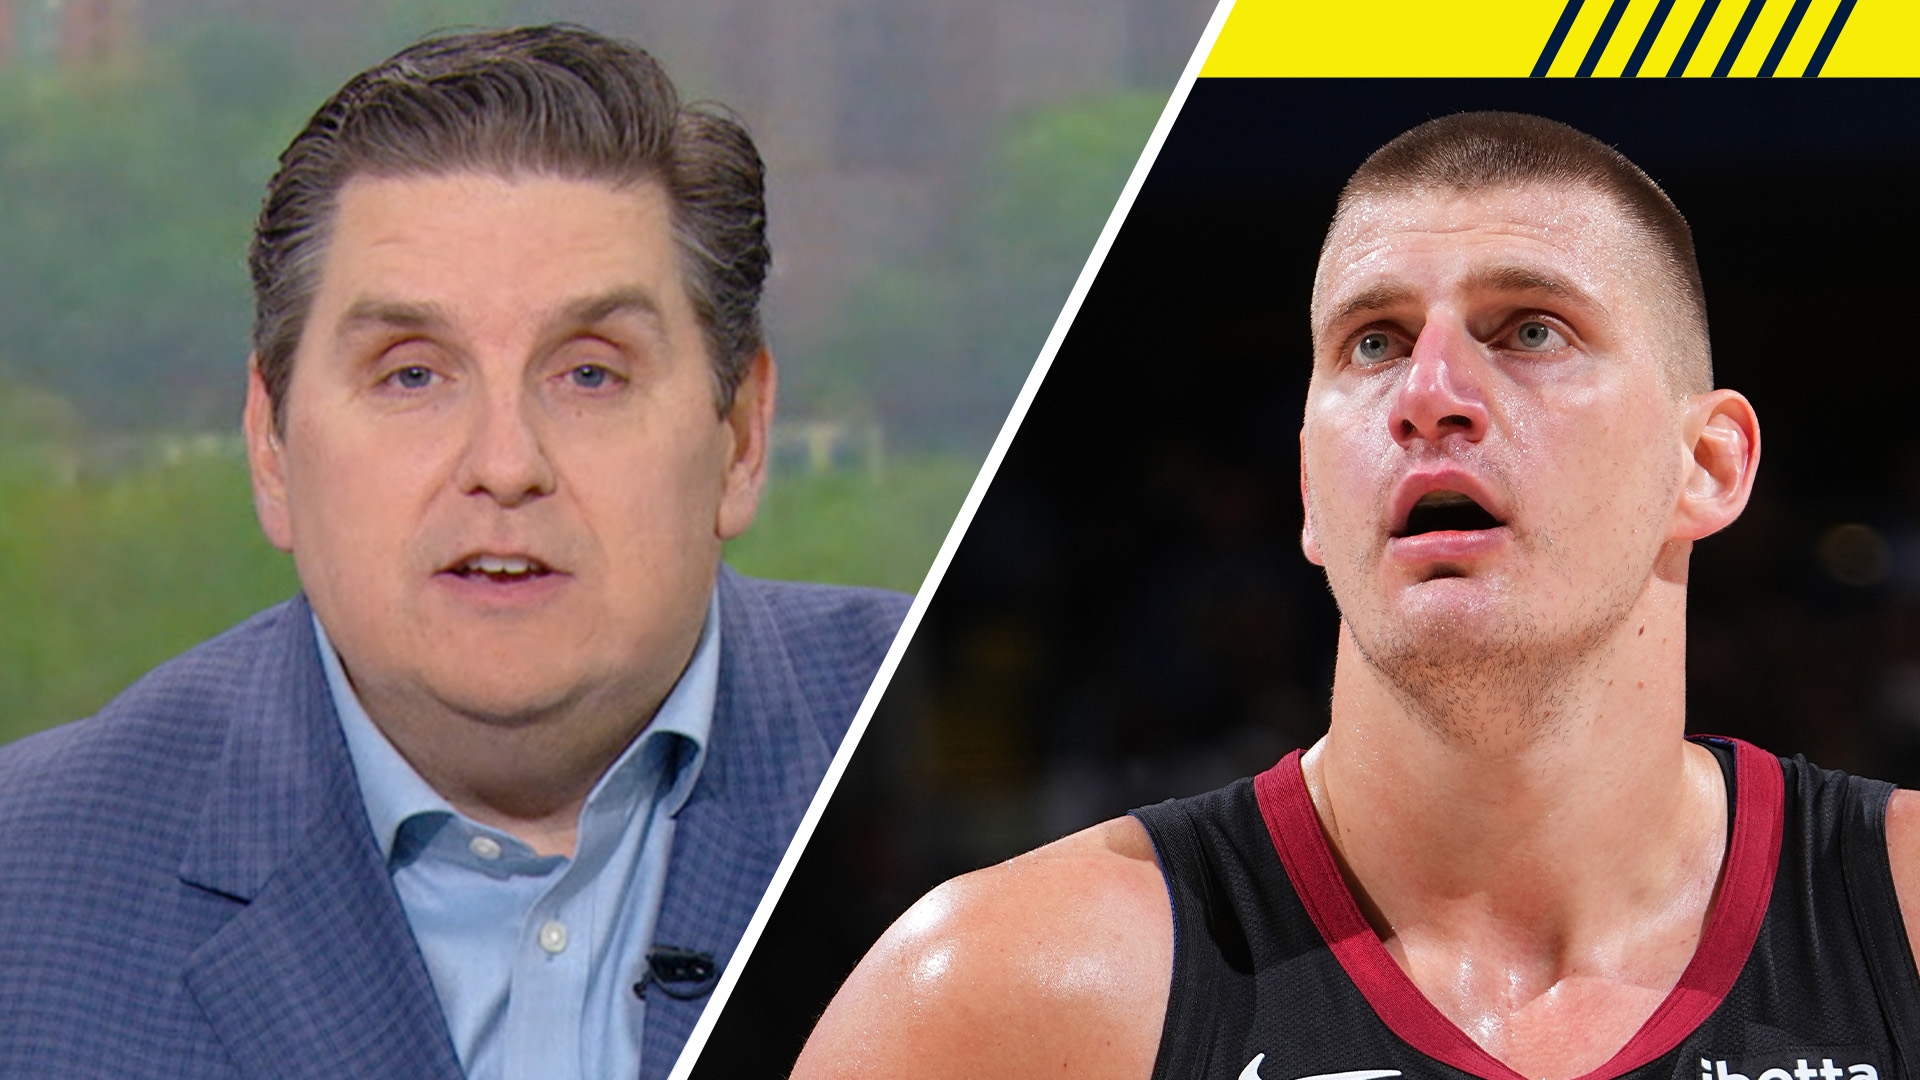 Windhorst on Jokic: 'We are seeing an absolute master at work'